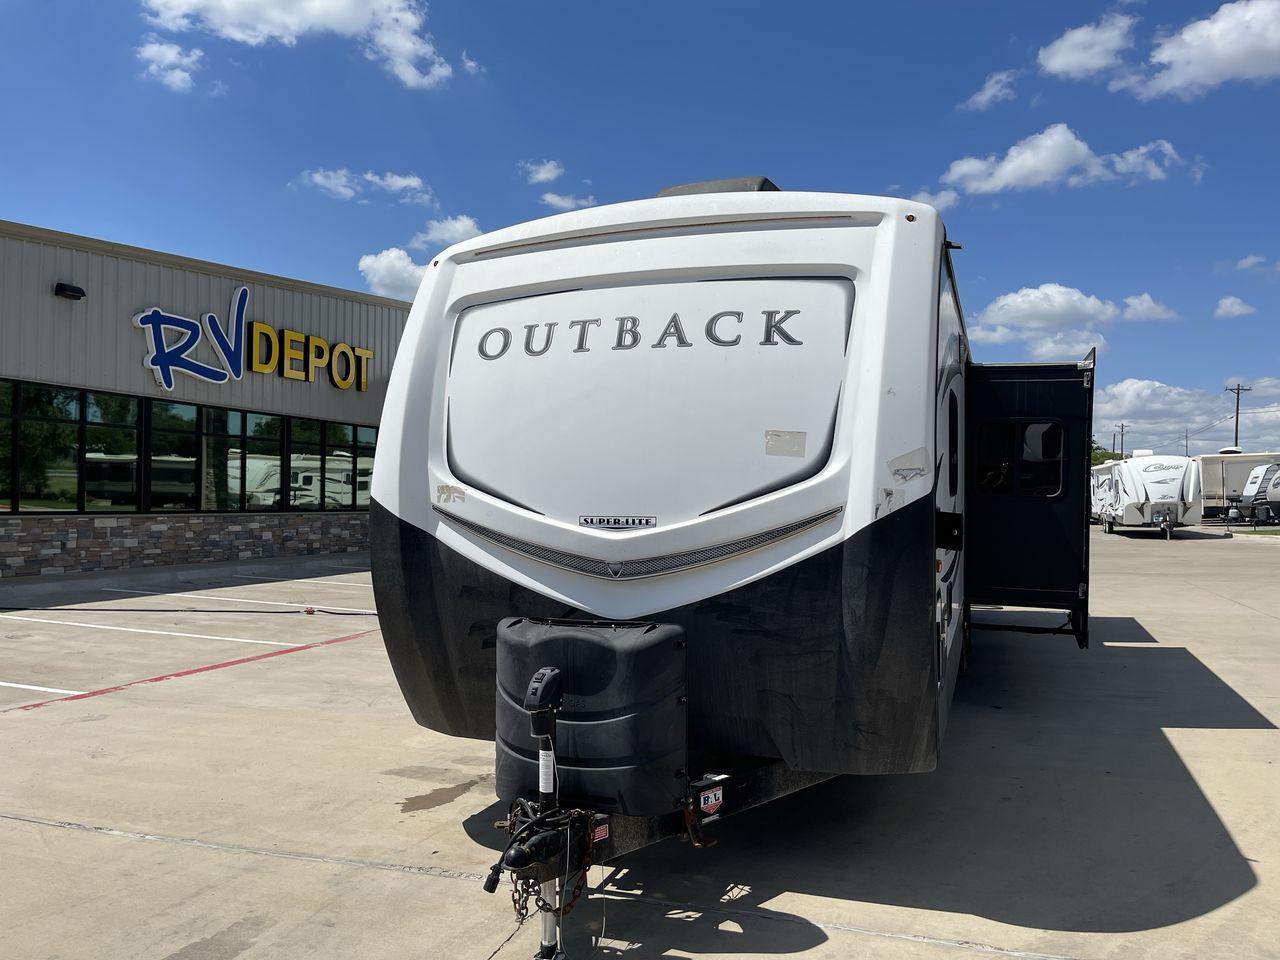 2018 BLACK KEYSTONE RV OUTBACK 325BH (4YDT32520JB) , Length: 37.42 ft. | Dry Weight: 8,428 lbs. | Gross Weight: 10,500 lbs. | Slides: 3 transmission, located at 4319 N Main St, Cleburne, TX, 76033, (817) 678-5133, 32.385960, -97.391212 - Gather the family inside this Outback Super Lite 325BH by Keystone RV, which features a bunkhouse, front bedroom, outside kitchen, and triple slides. The dimensions of this 325BH model are 37.42 ft in length, 8 ft in width, and 11.33 ft in height. It has a dry weight of 8,428 lbs with a payload capa - Photo #1